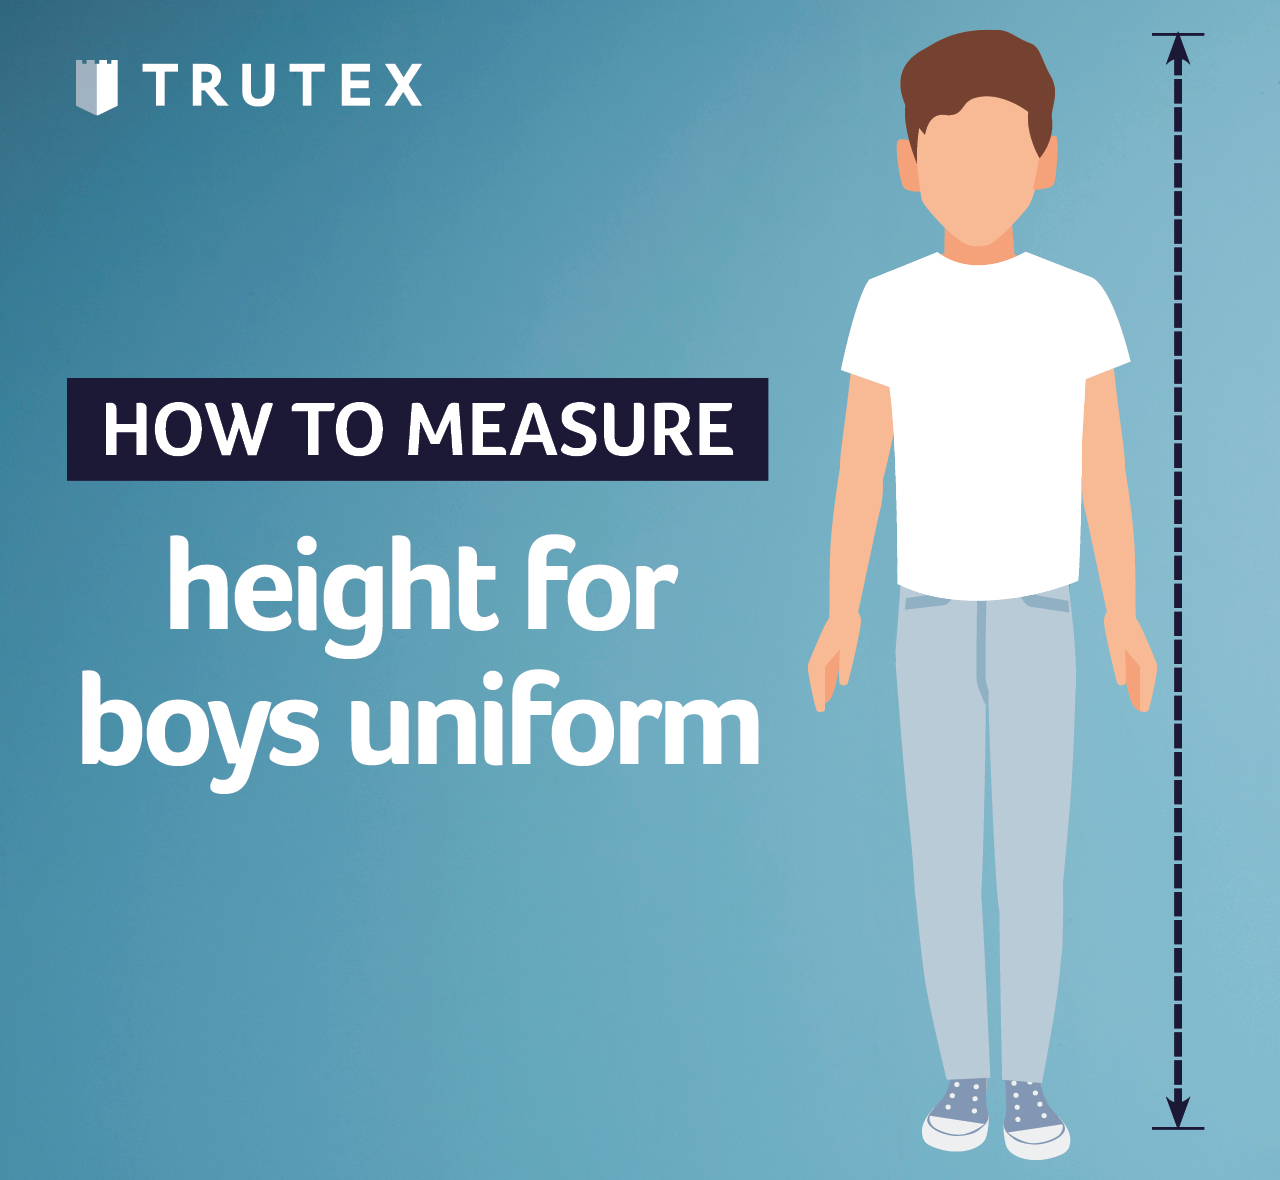 How to measure: height for boys uniform